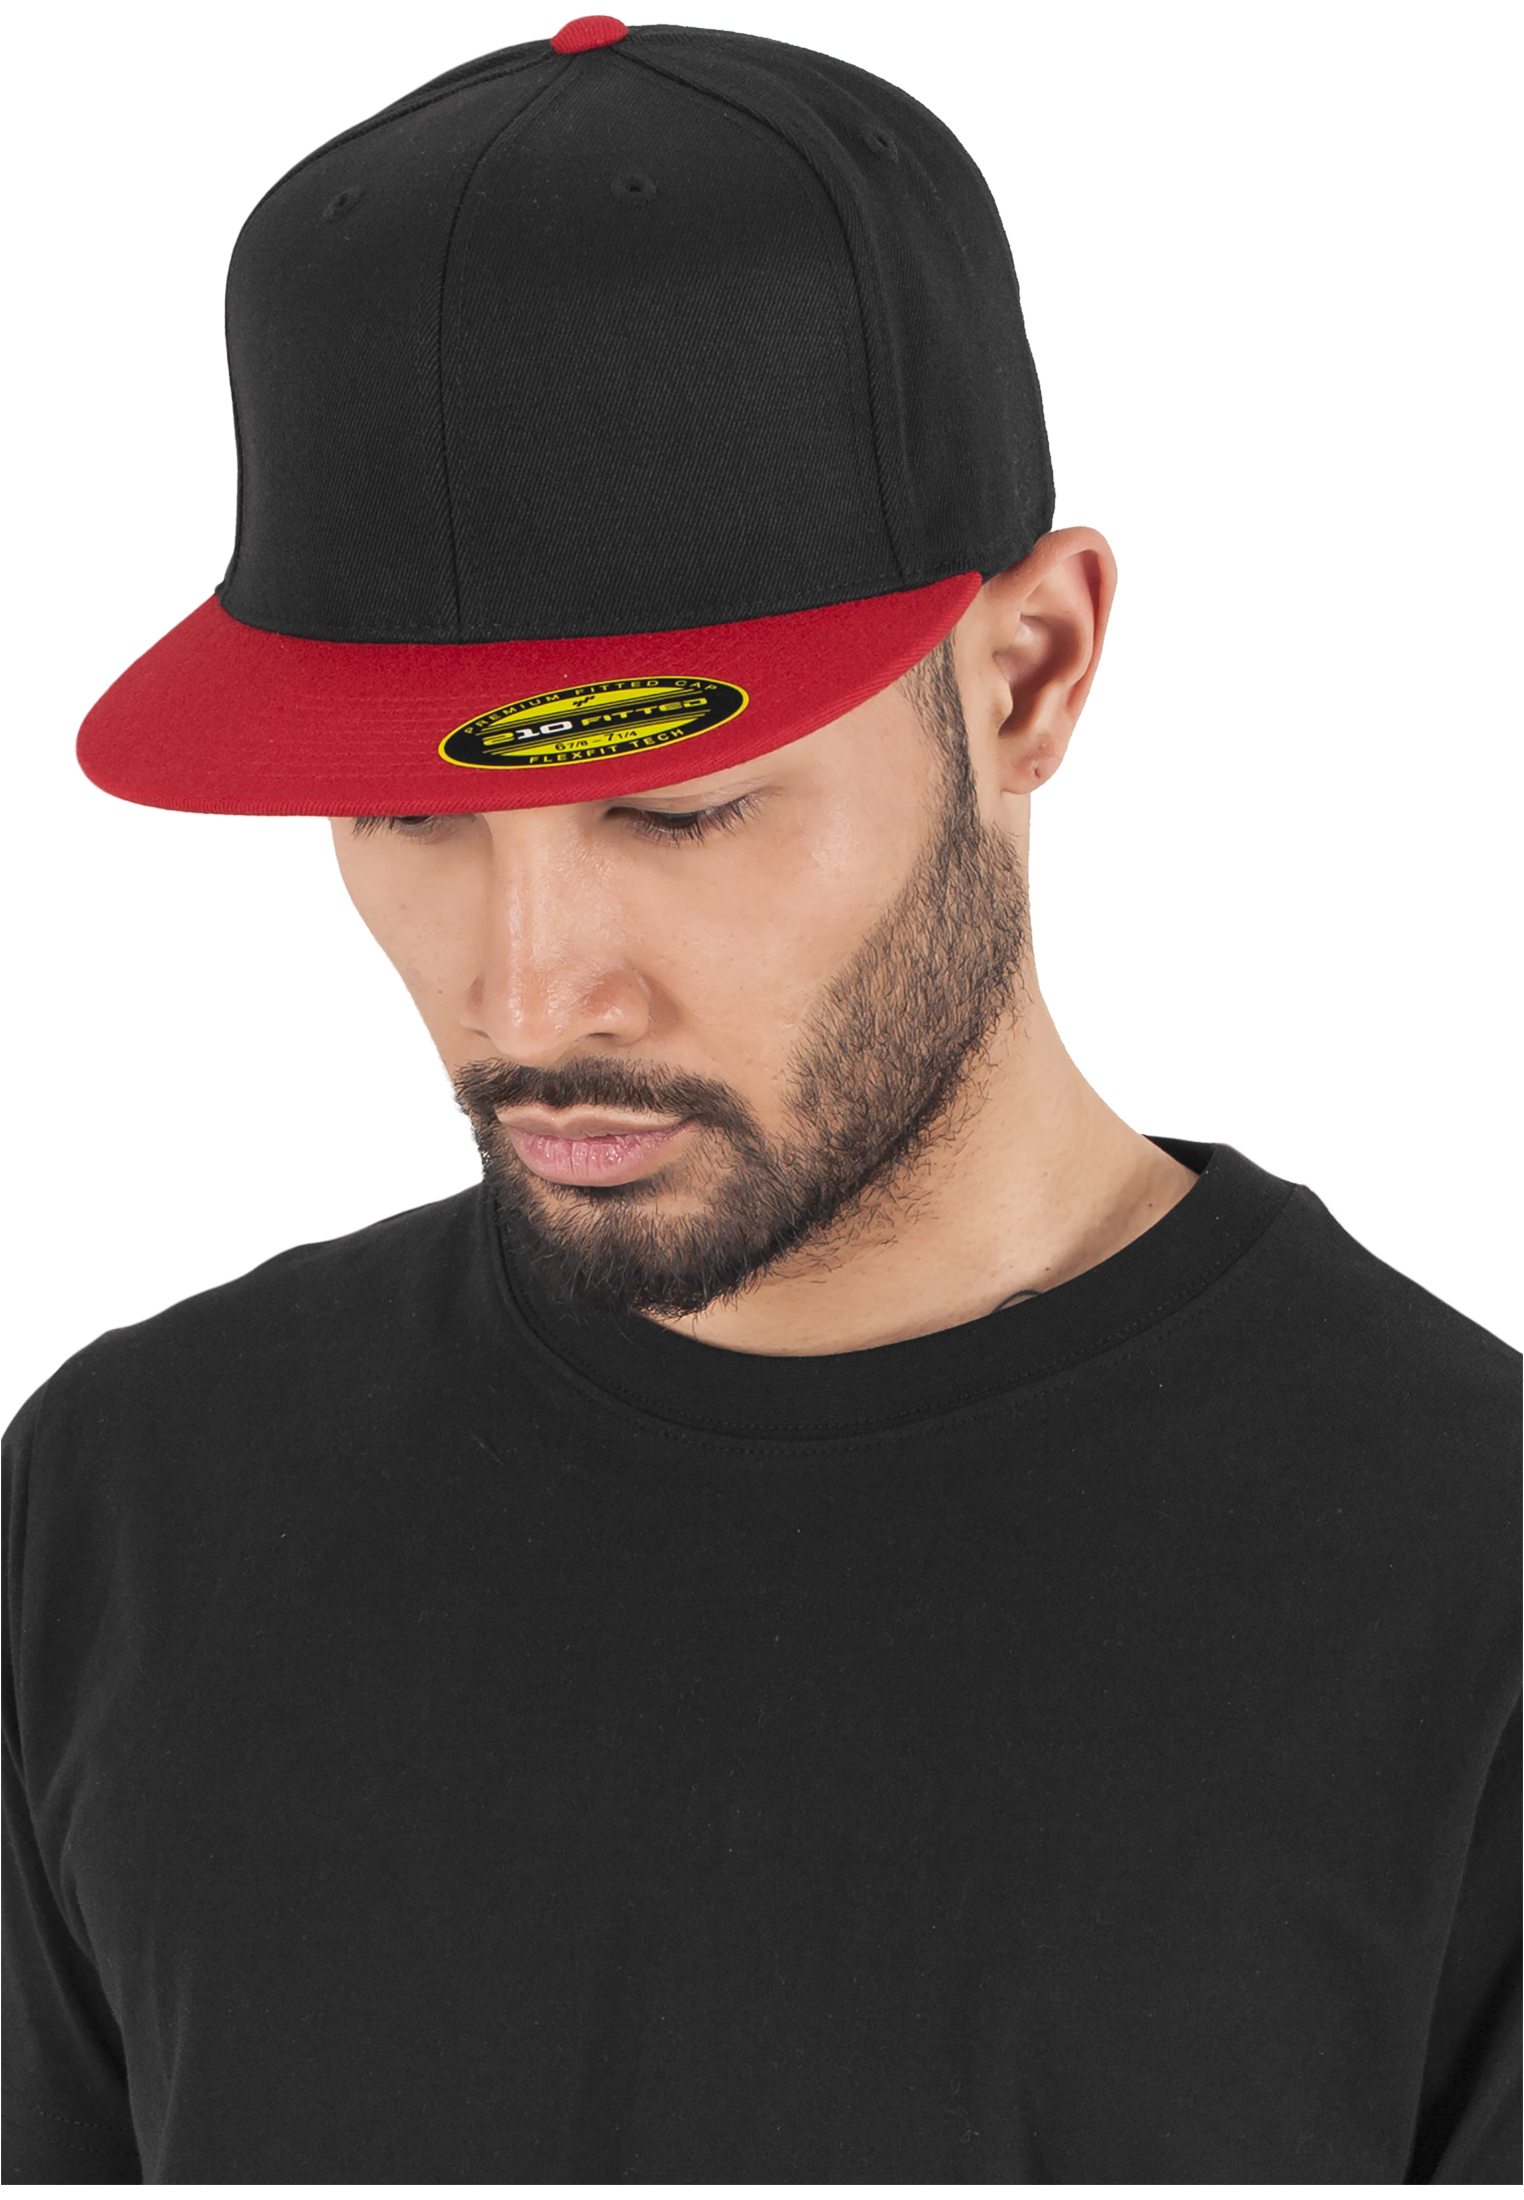 Premium 210 Fitted 2-Tone blk/red